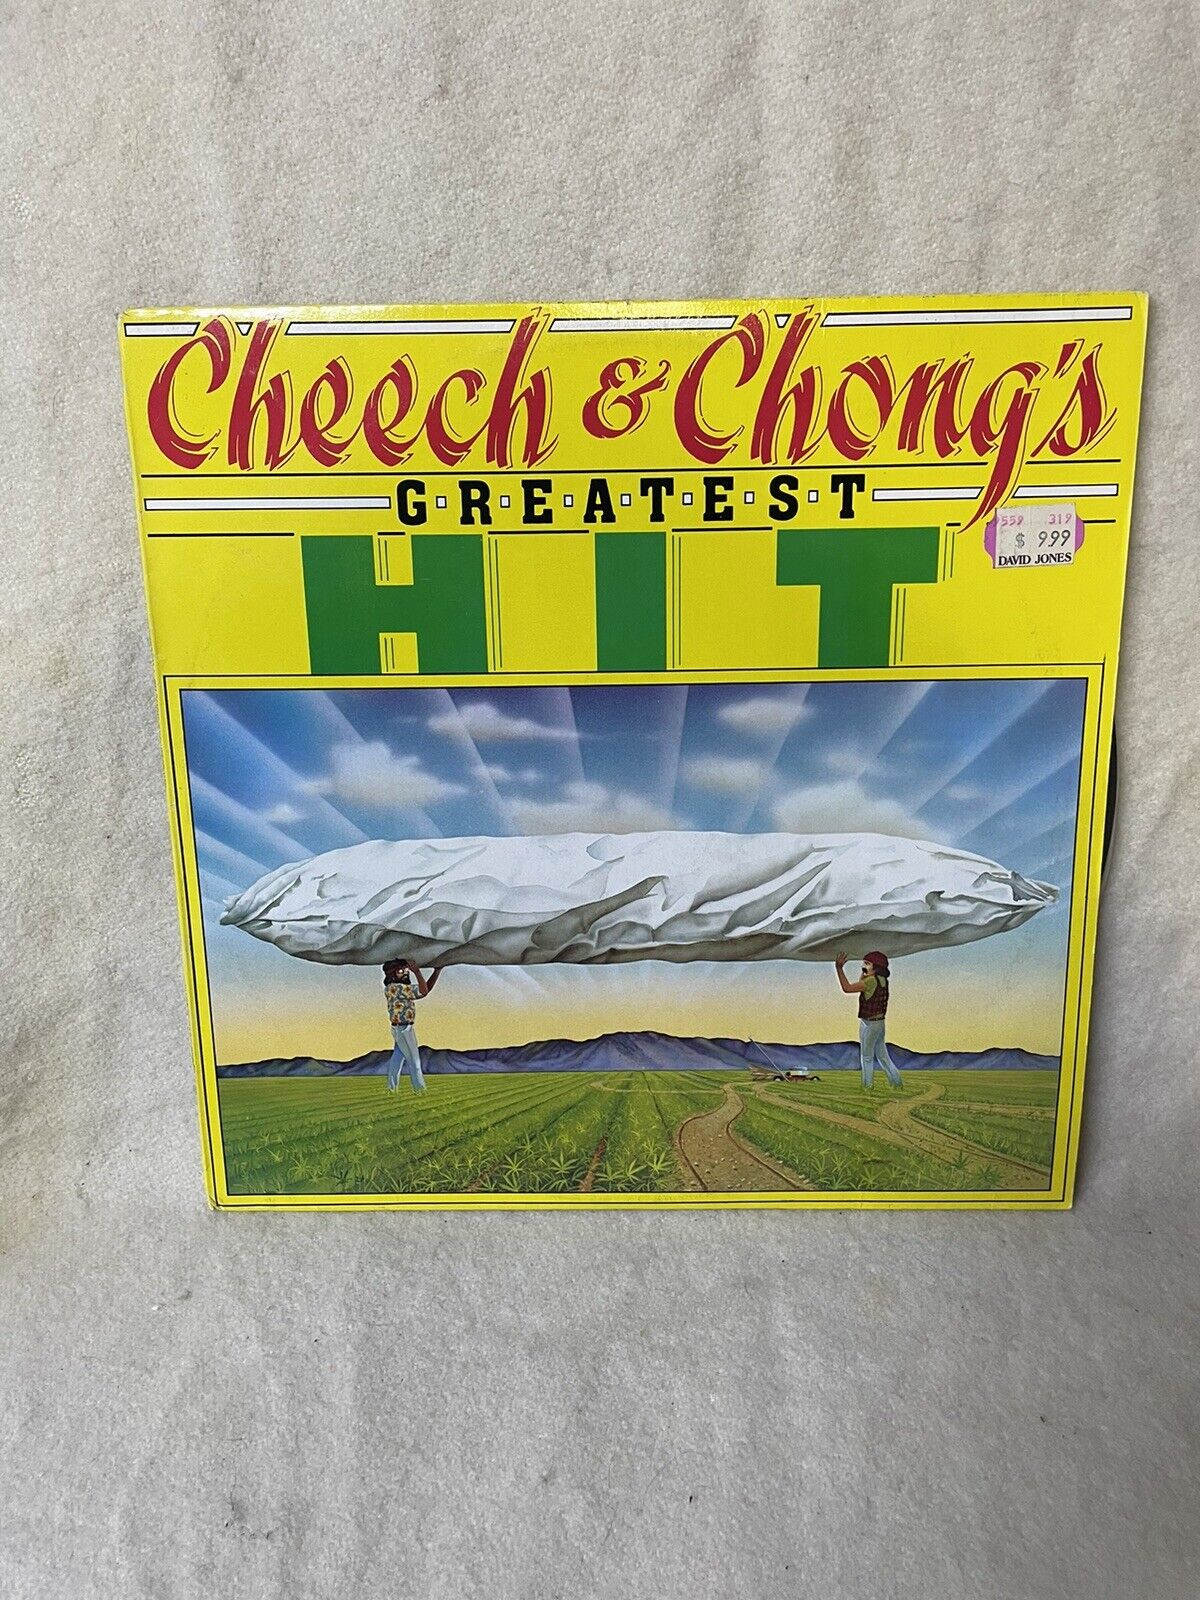 CHEECH AND CHONG GREATEST HIT Vinyl LP Record 1981 WB Records BSK 3614 Excellent